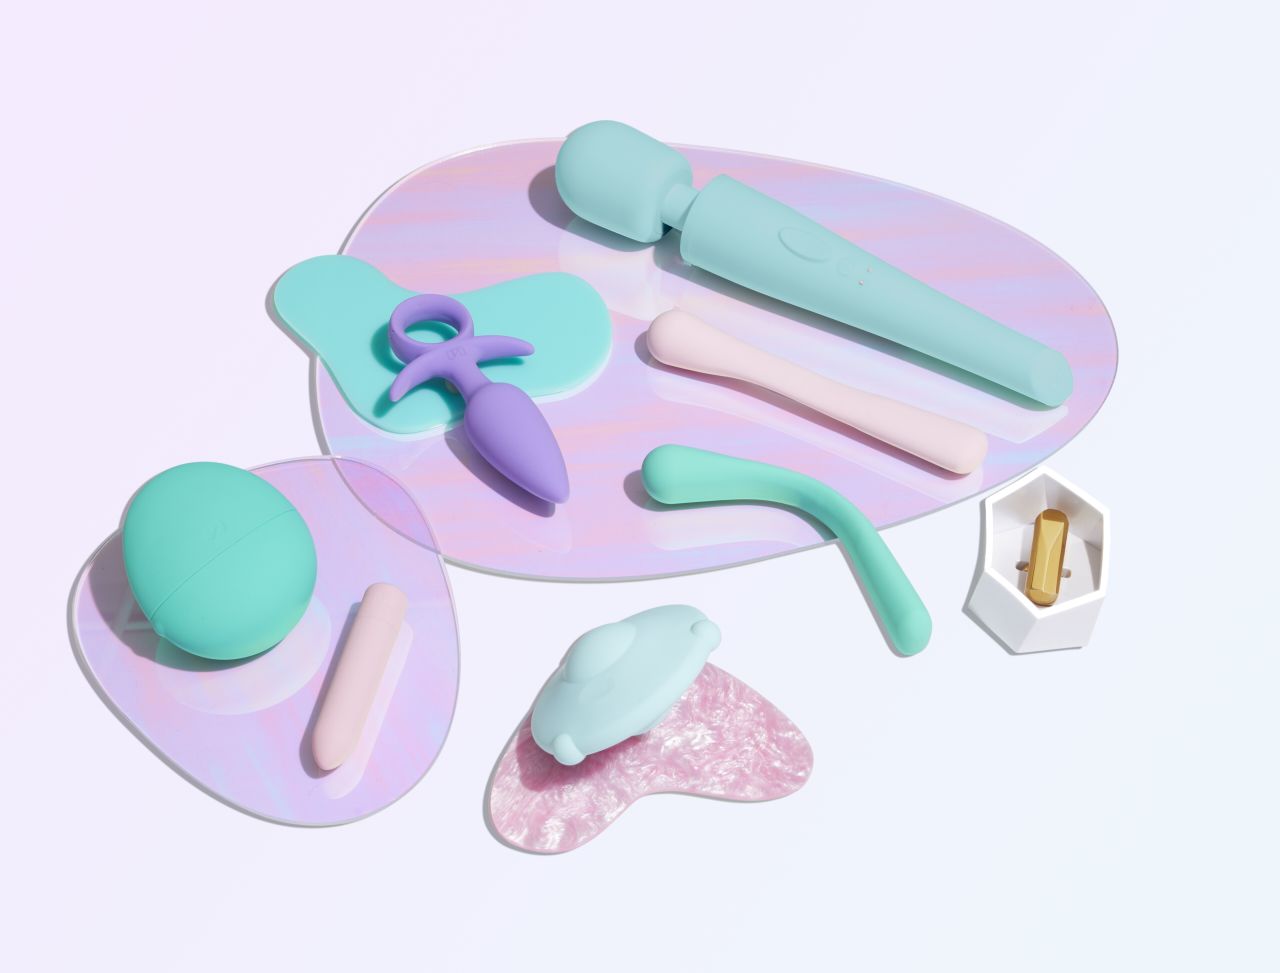 A selection of Unbound sex toys in pleasing colors. 